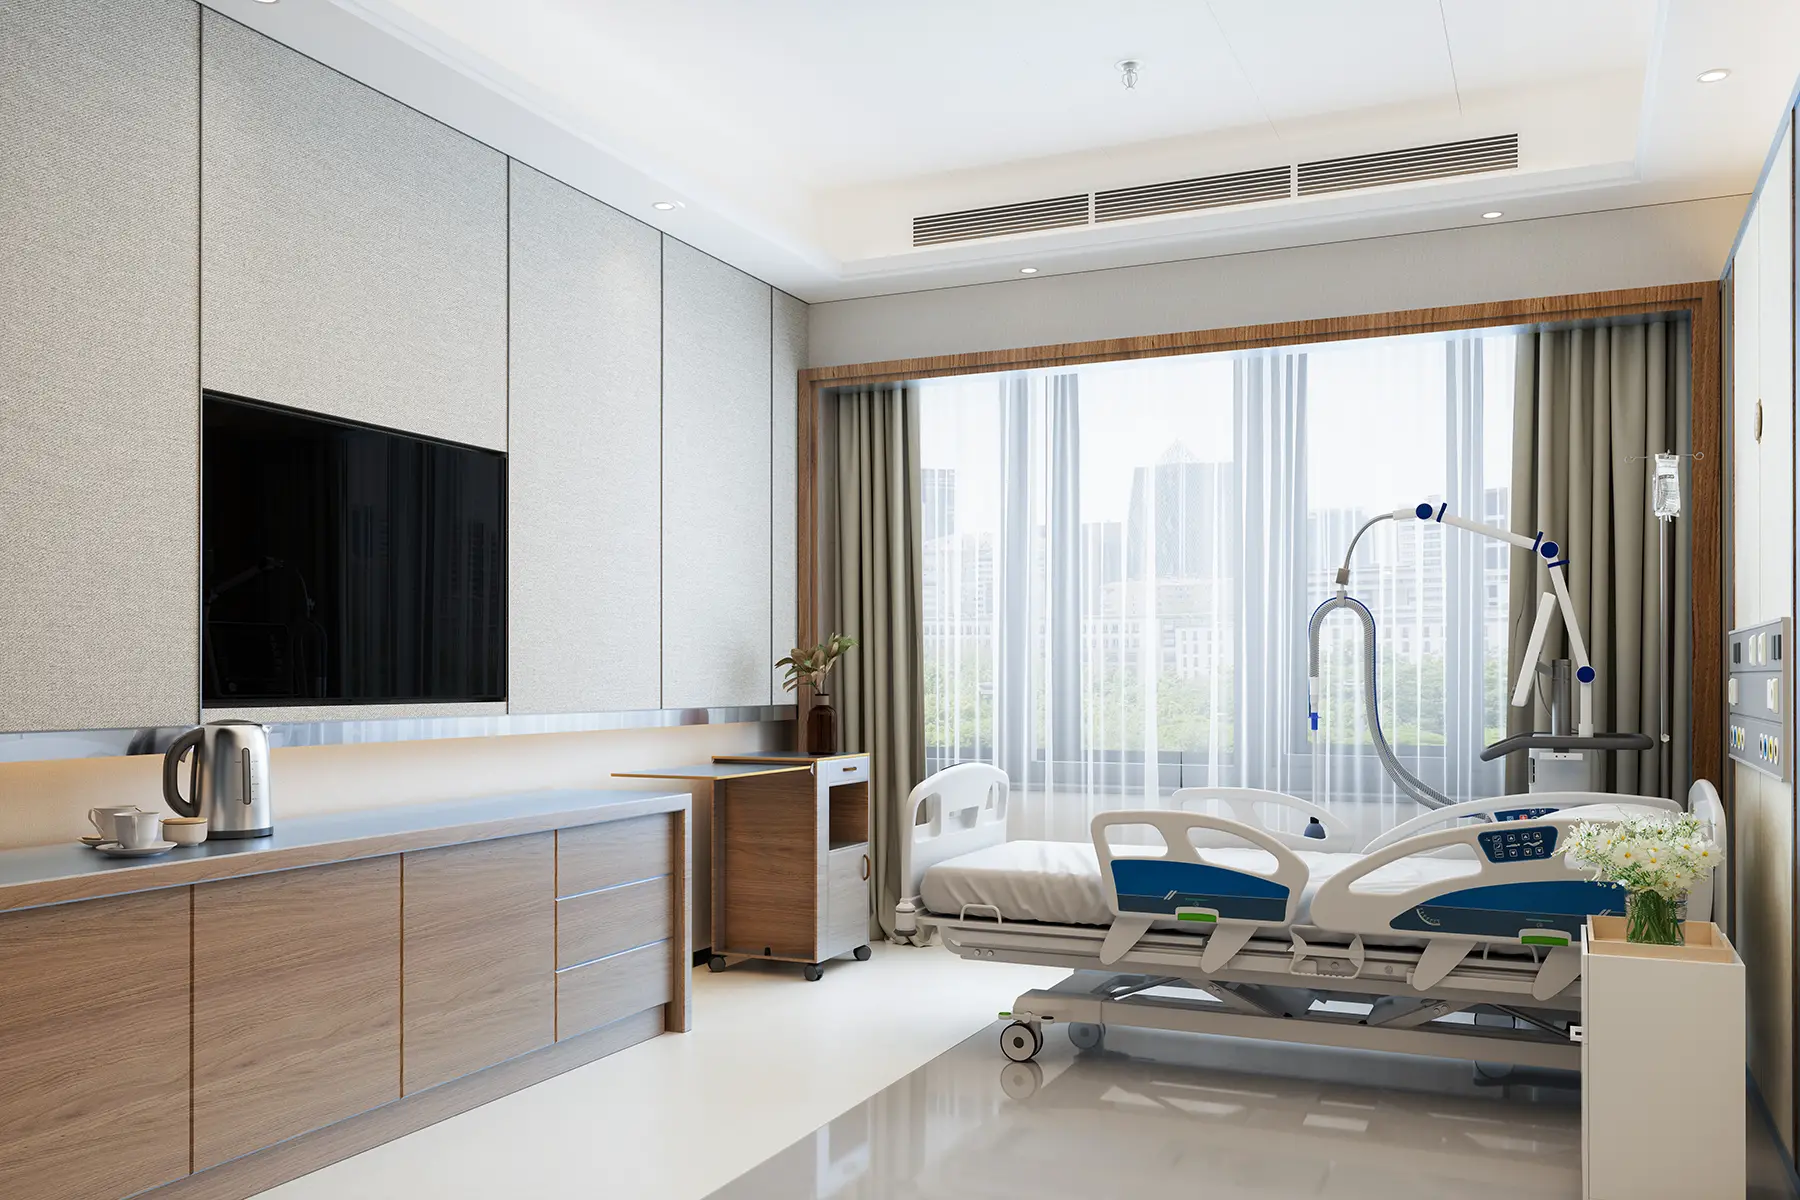 A luxurious private hospital room